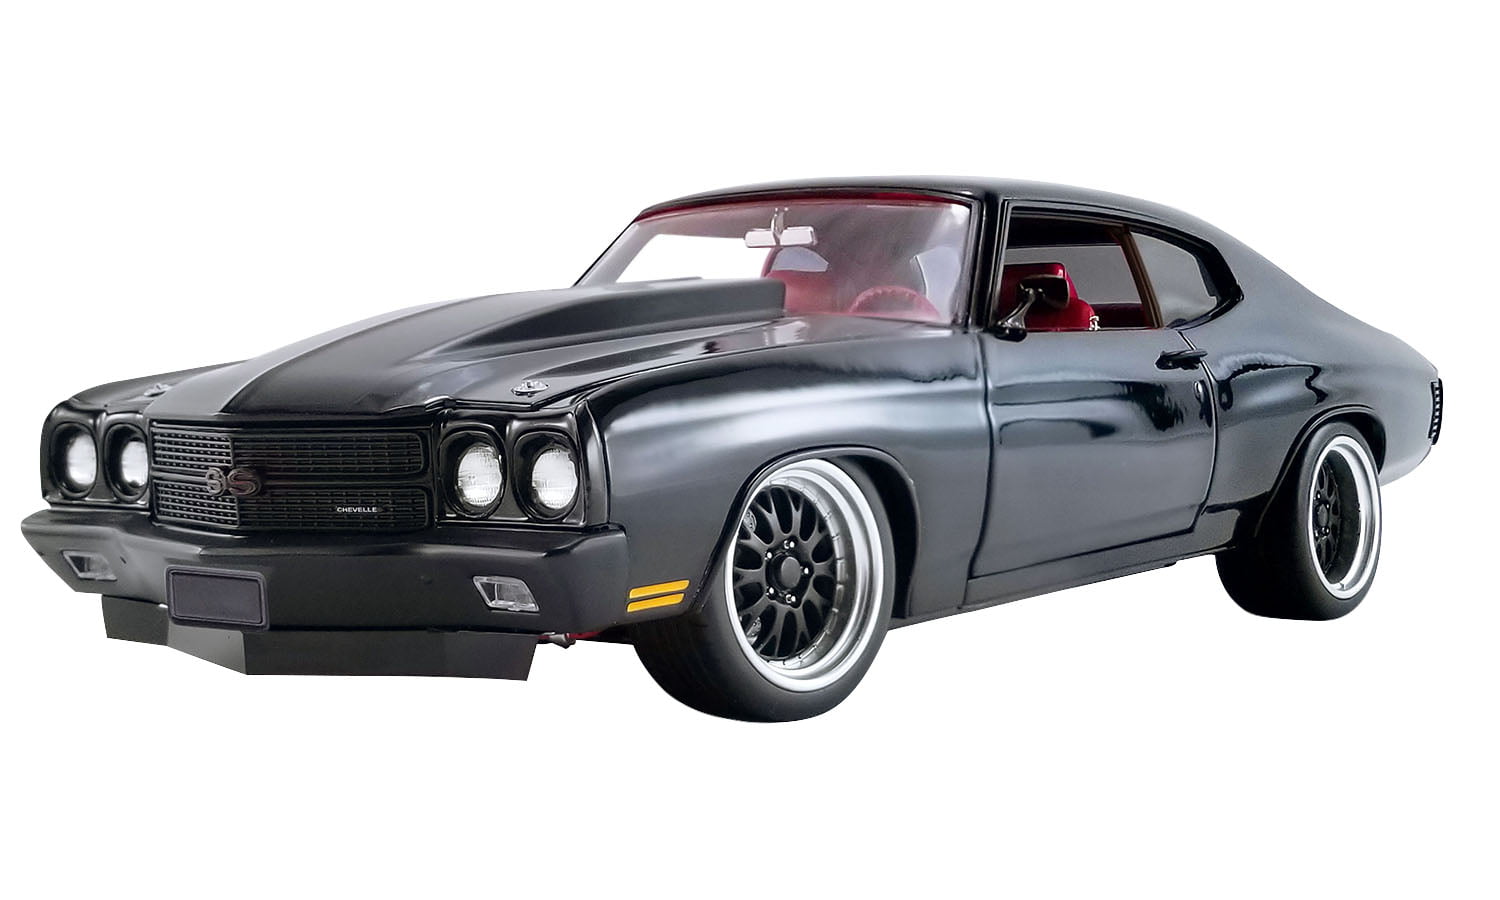 1970 CHEVROLET CHEVELLE SS 454 STREET FIGHTER G-FORCE BLACK 1:18 ACME A1805517 